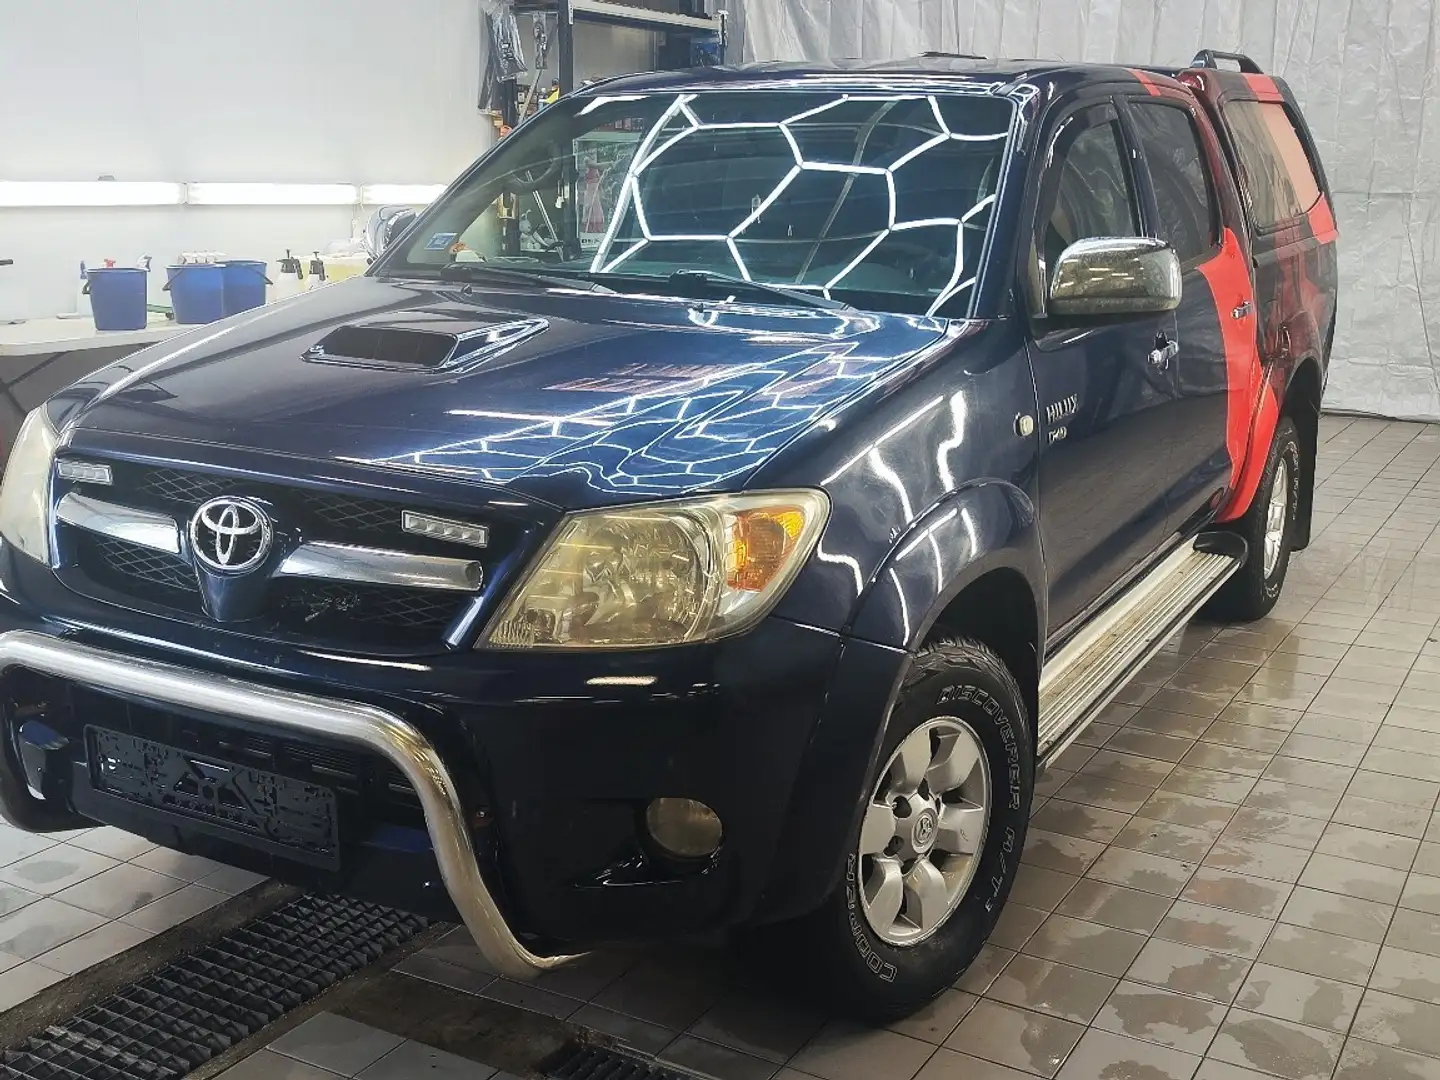 Toyota Hilux 4x4 Double Cab.to sell only Africa Black - 2